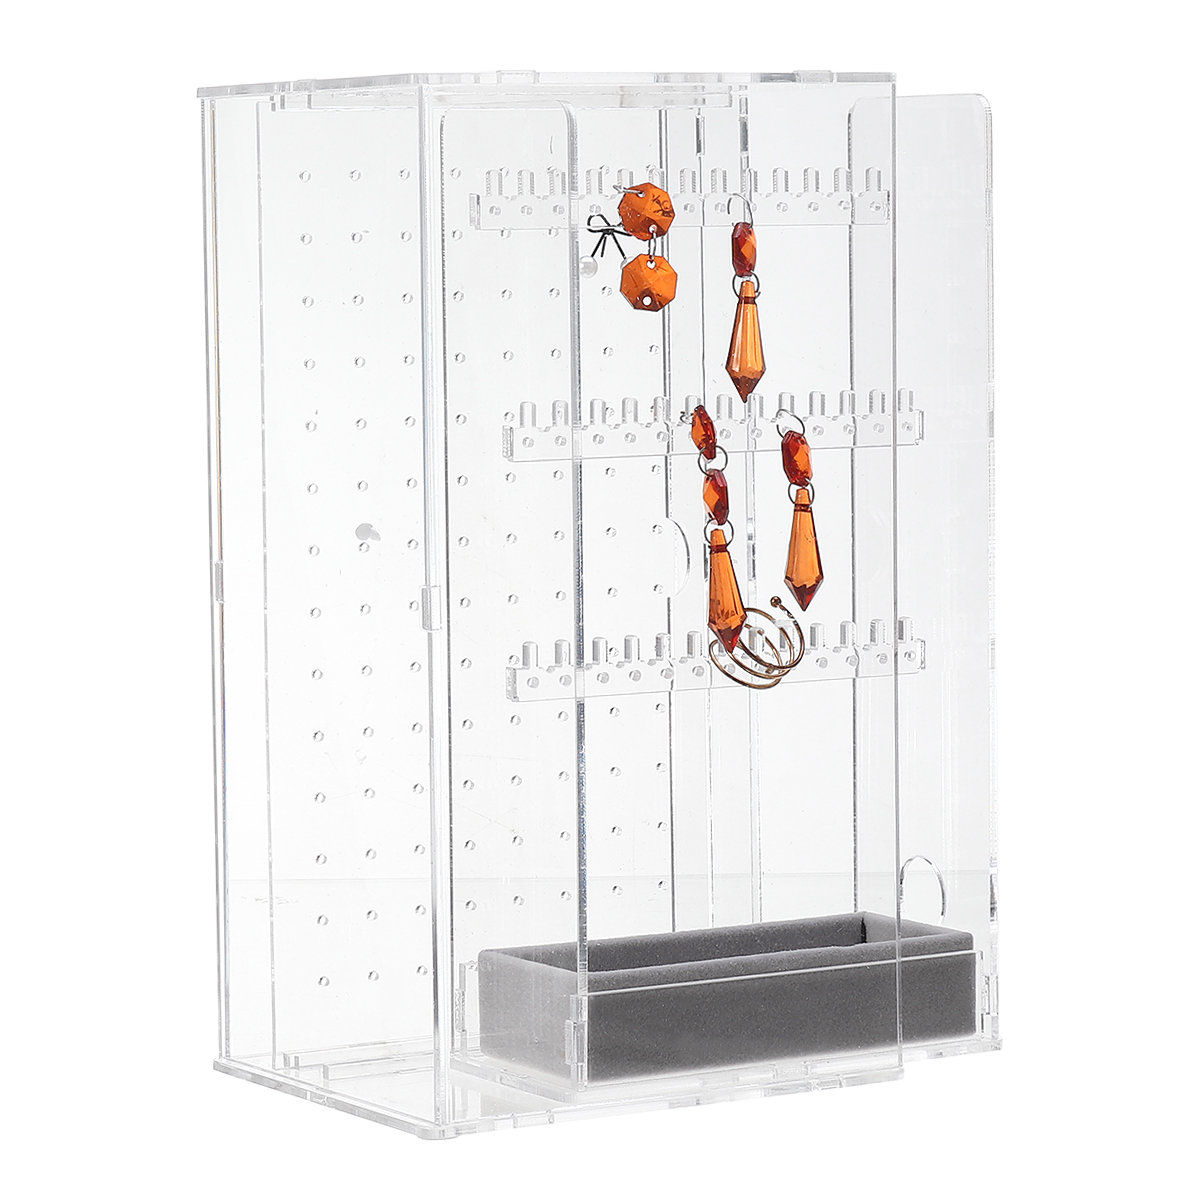 Find Acrylic Multifunctional Smart Ring Storage Box High end Jewelry Storage Box Earrings Watch Necklace Display Stand for Sale on Gipsybee.com with cryptocurrencies